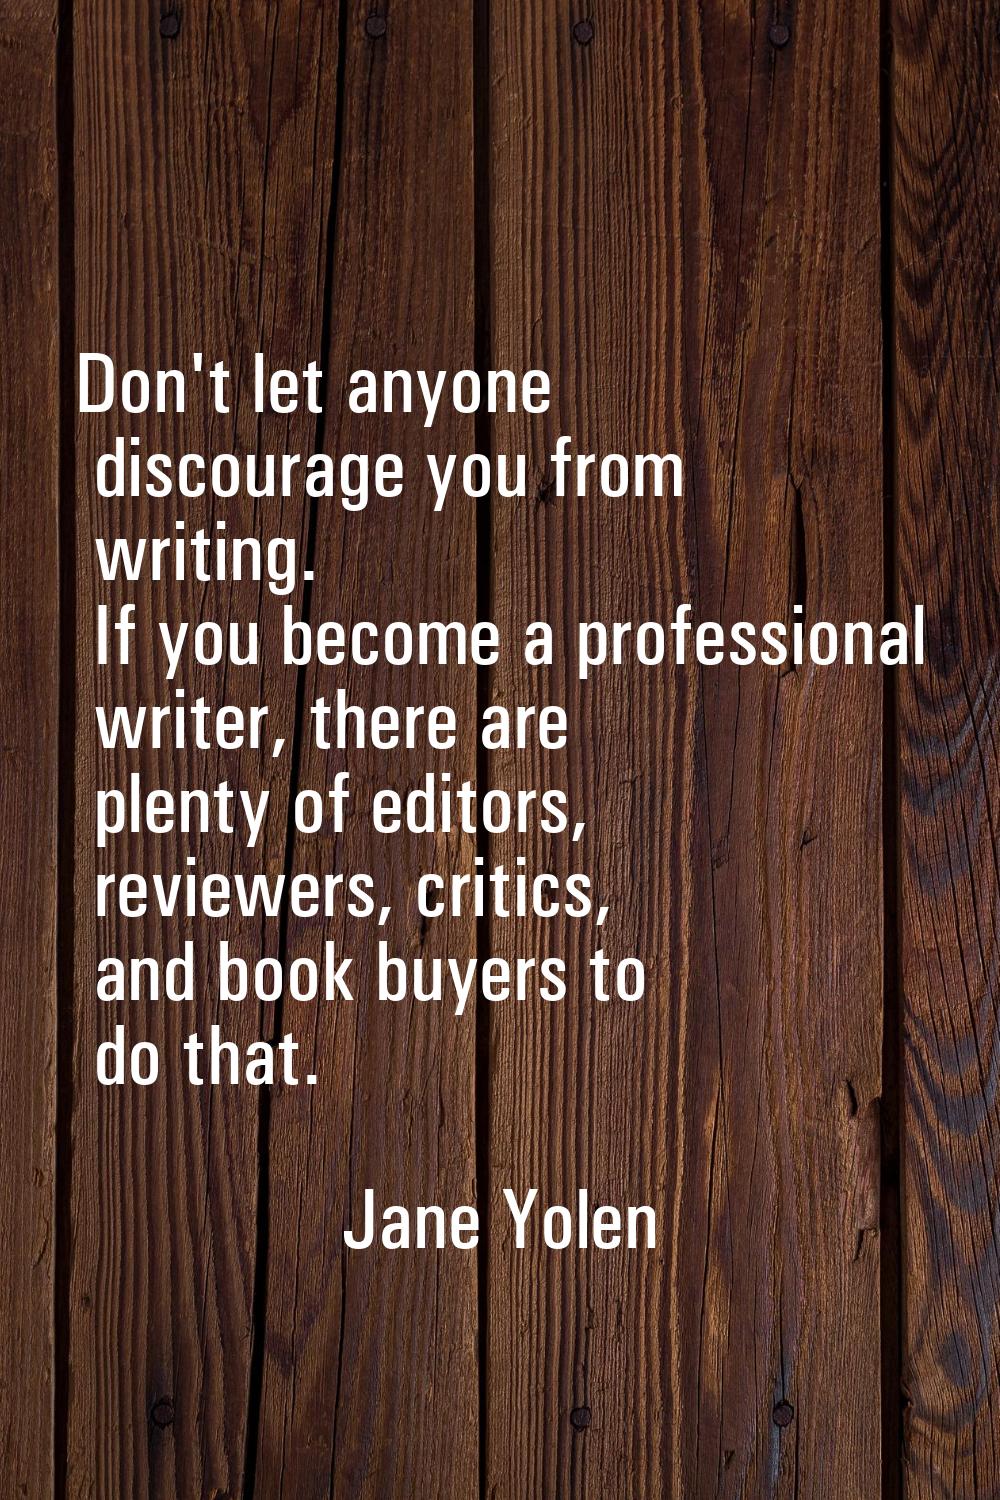 Don't let anyone discourage you from writing. If you become a professional writer, there are plenty